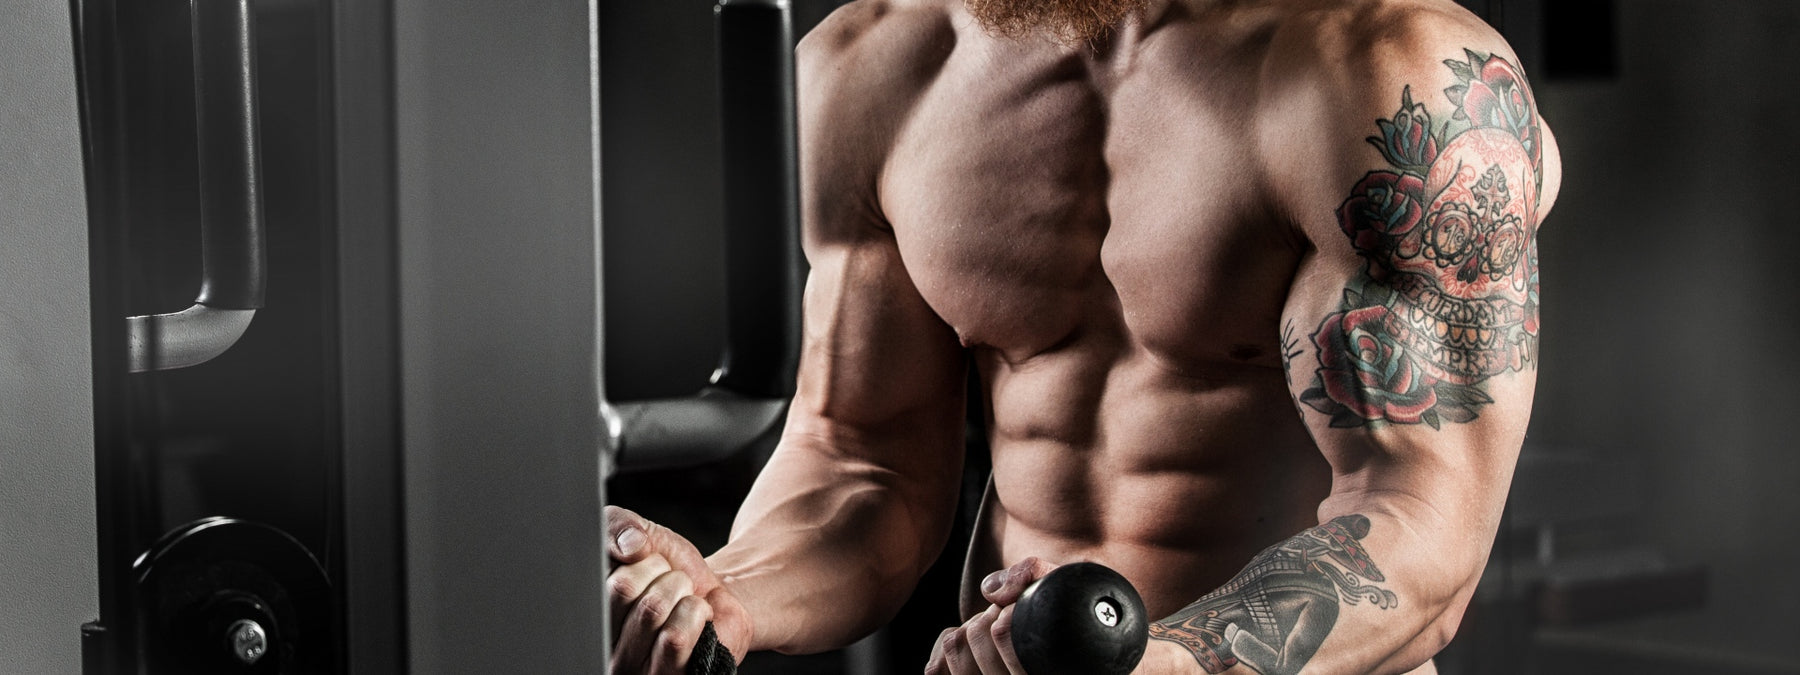 How to Stay Shredded and Strong During the Holidays